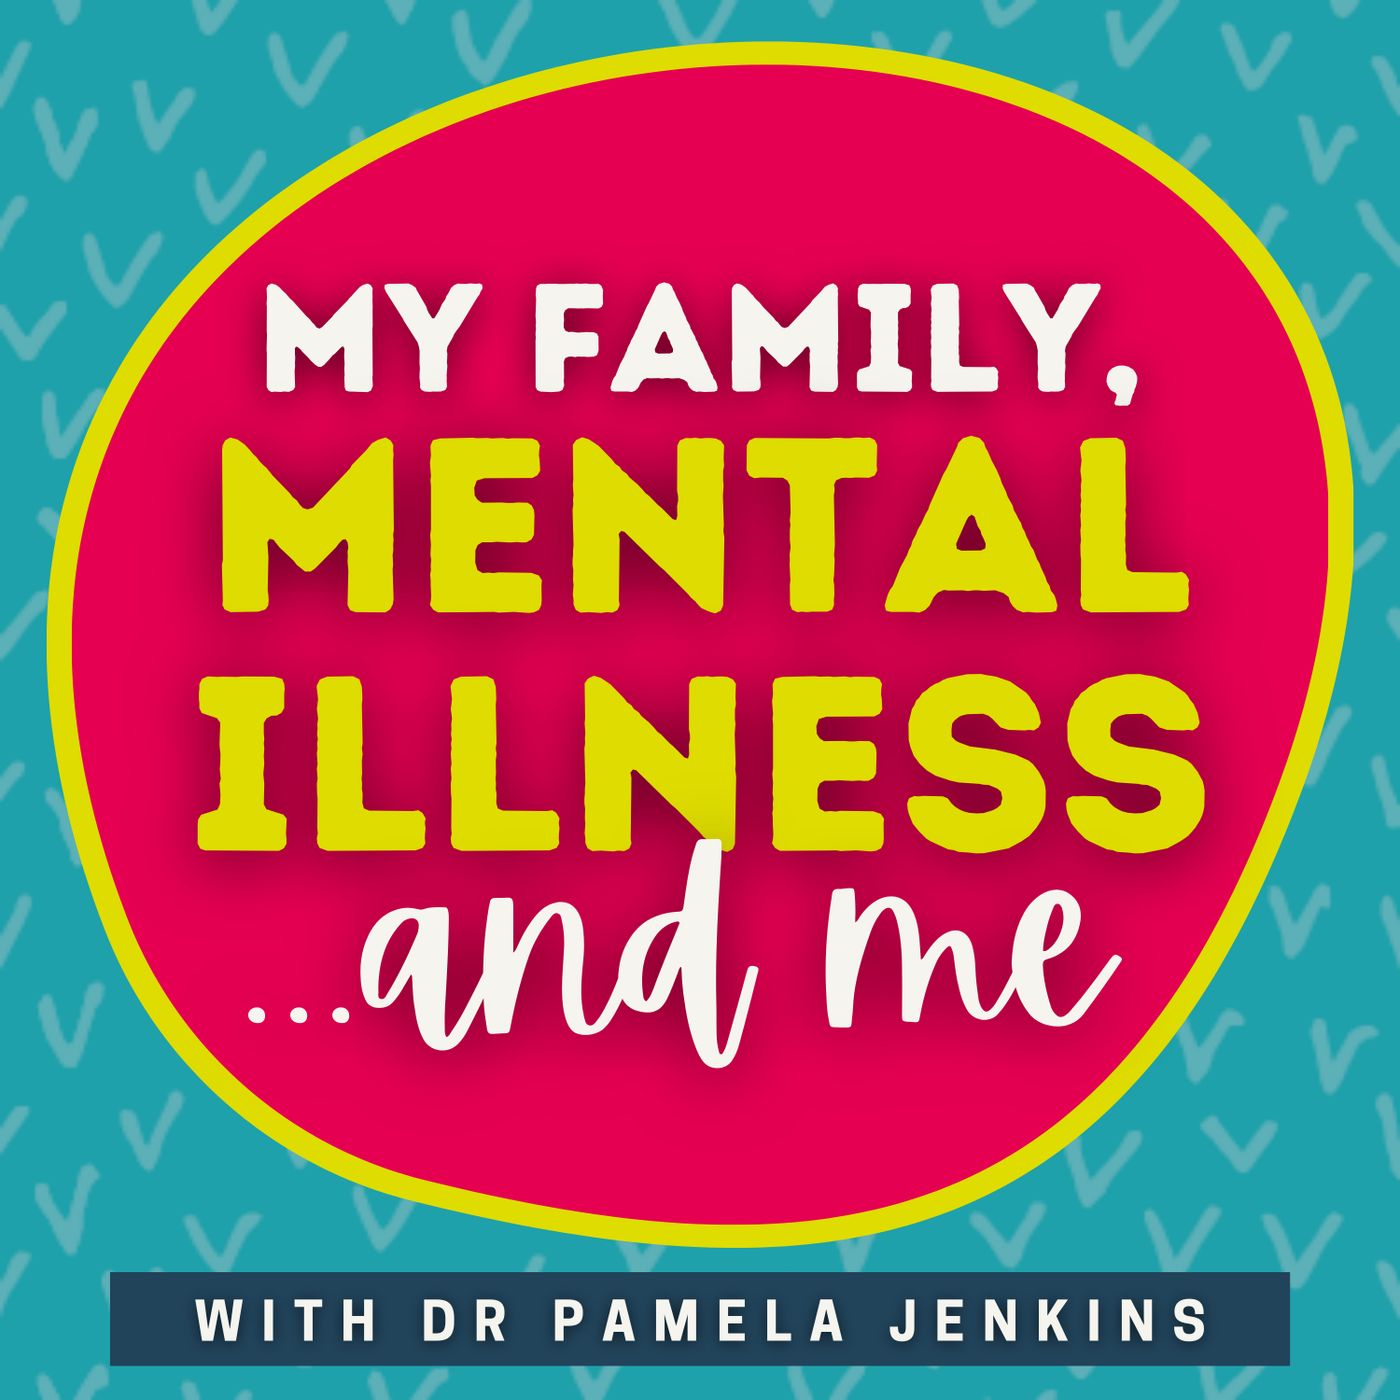 Coming soon: My Family, Mental Illness, and Me